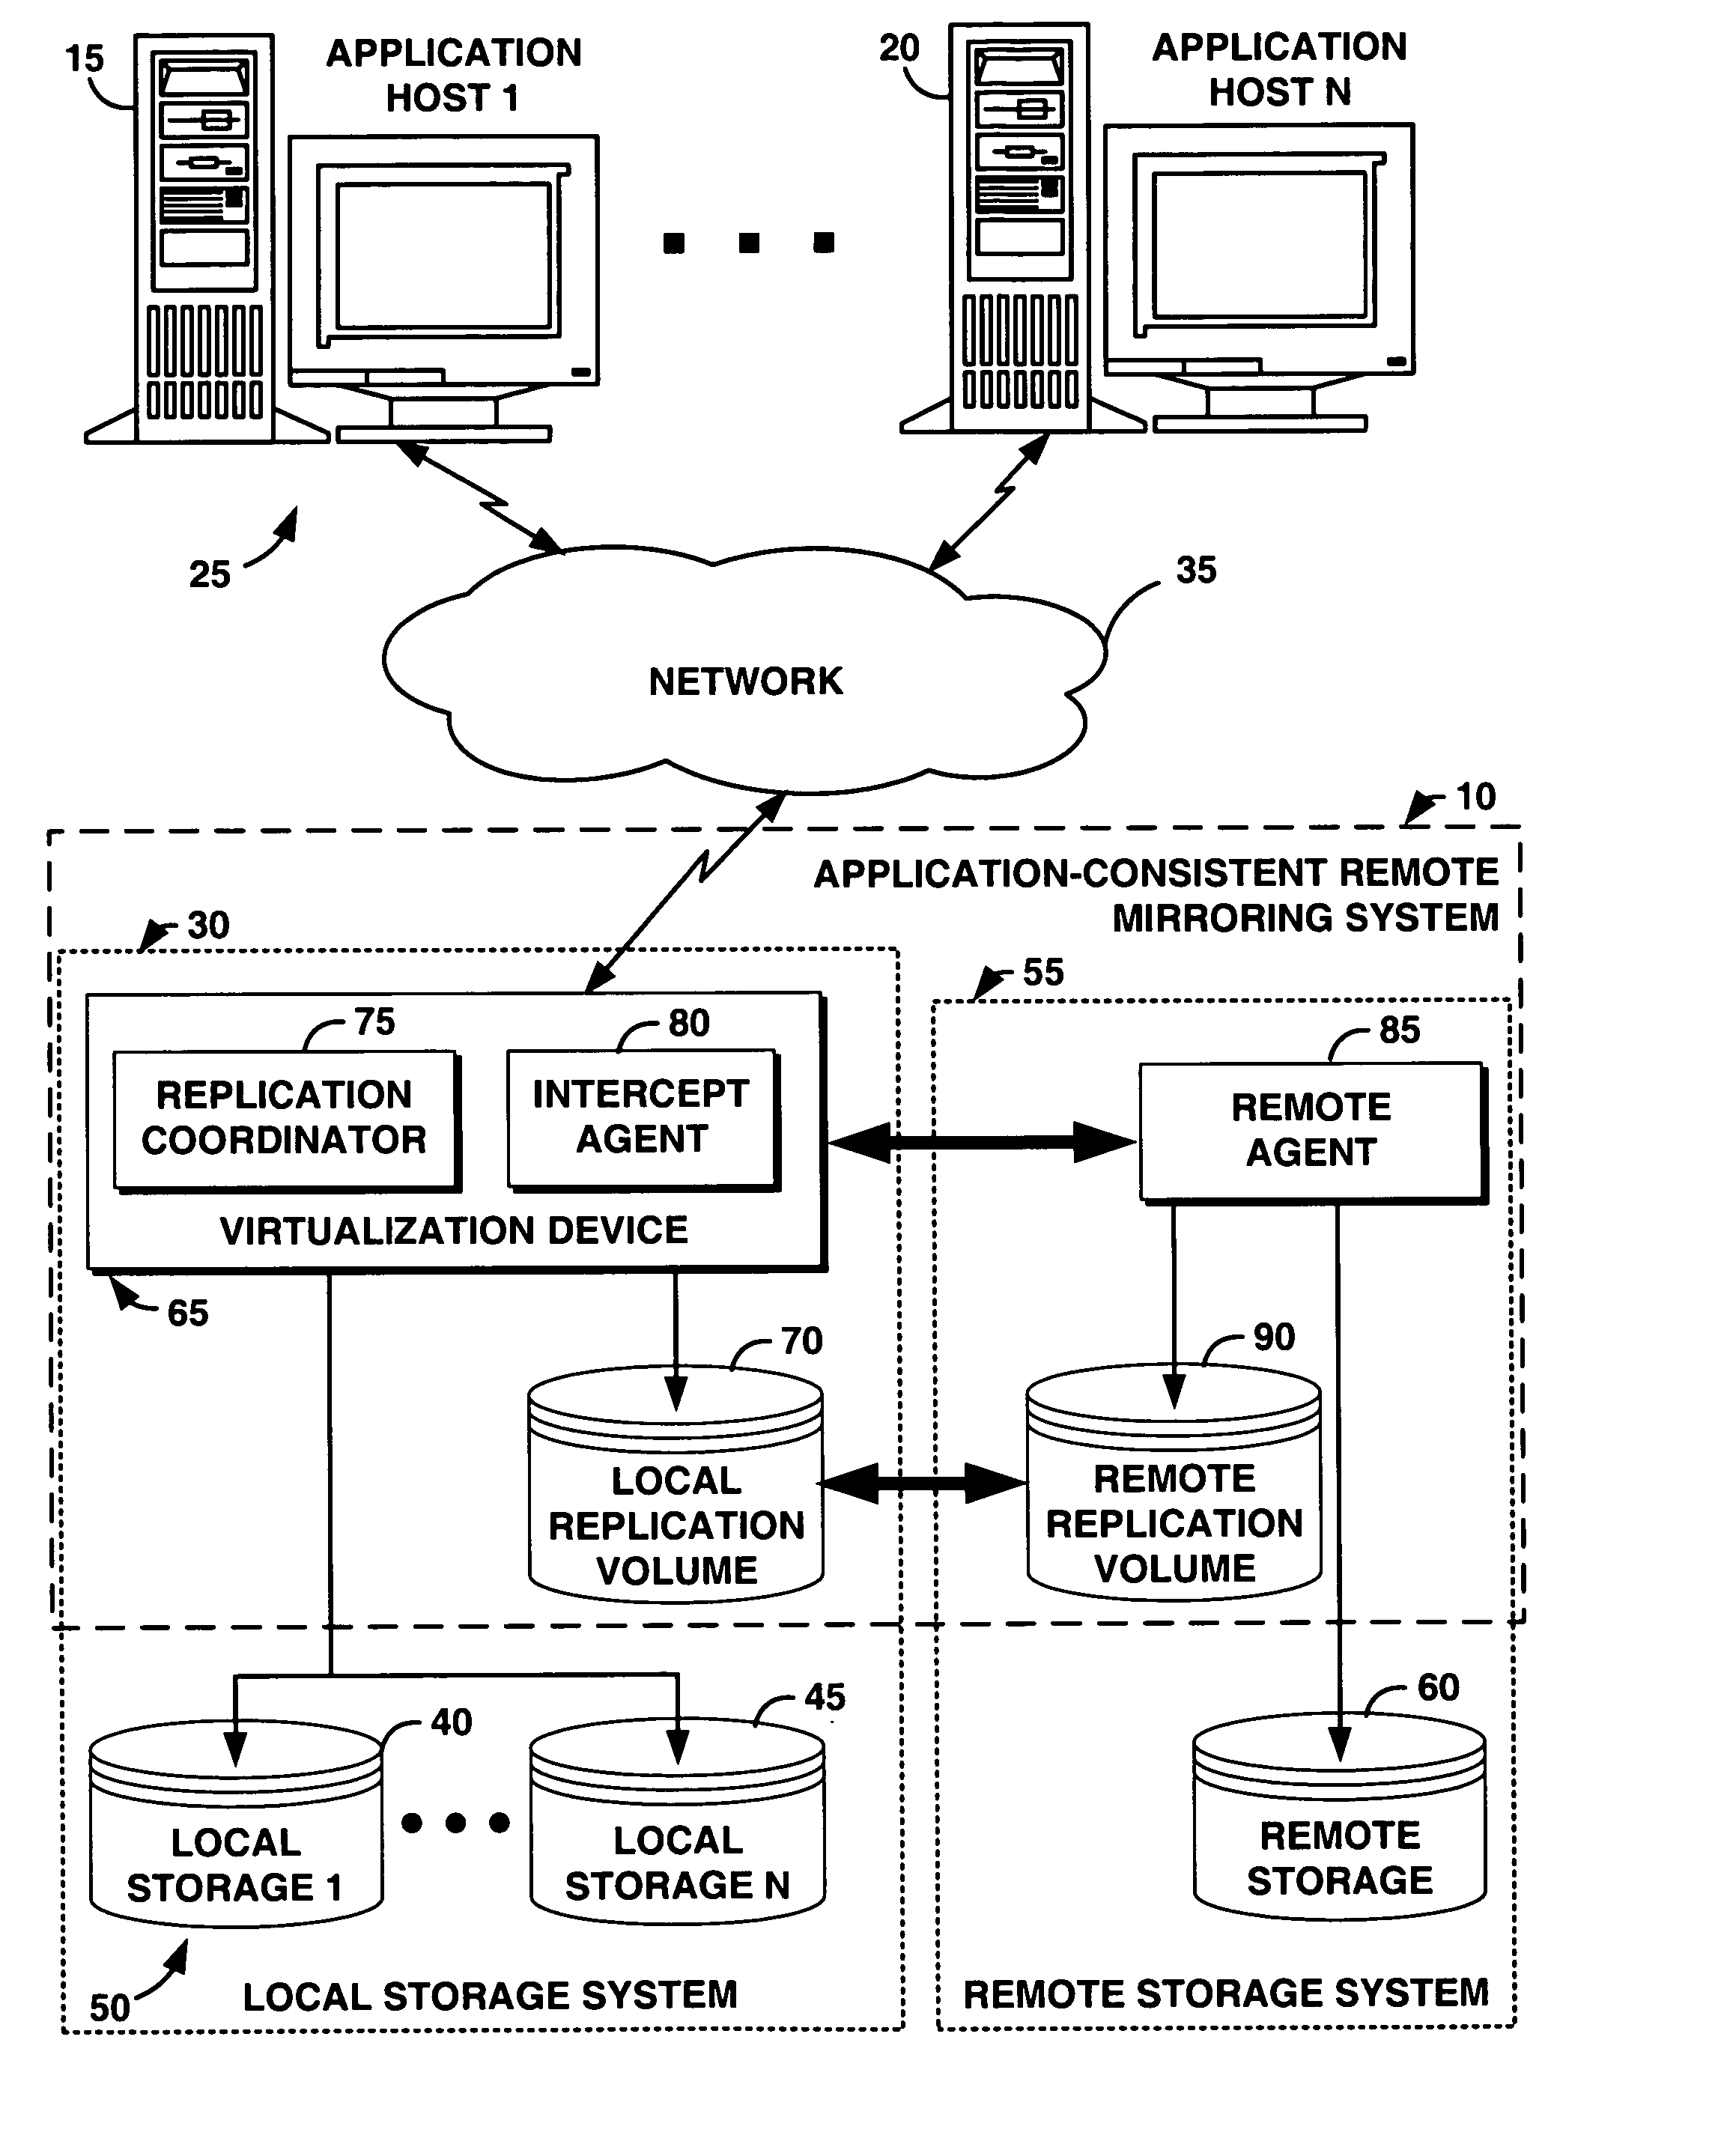 System and method for creating an application-consistent remote copy of data using remote mirroring